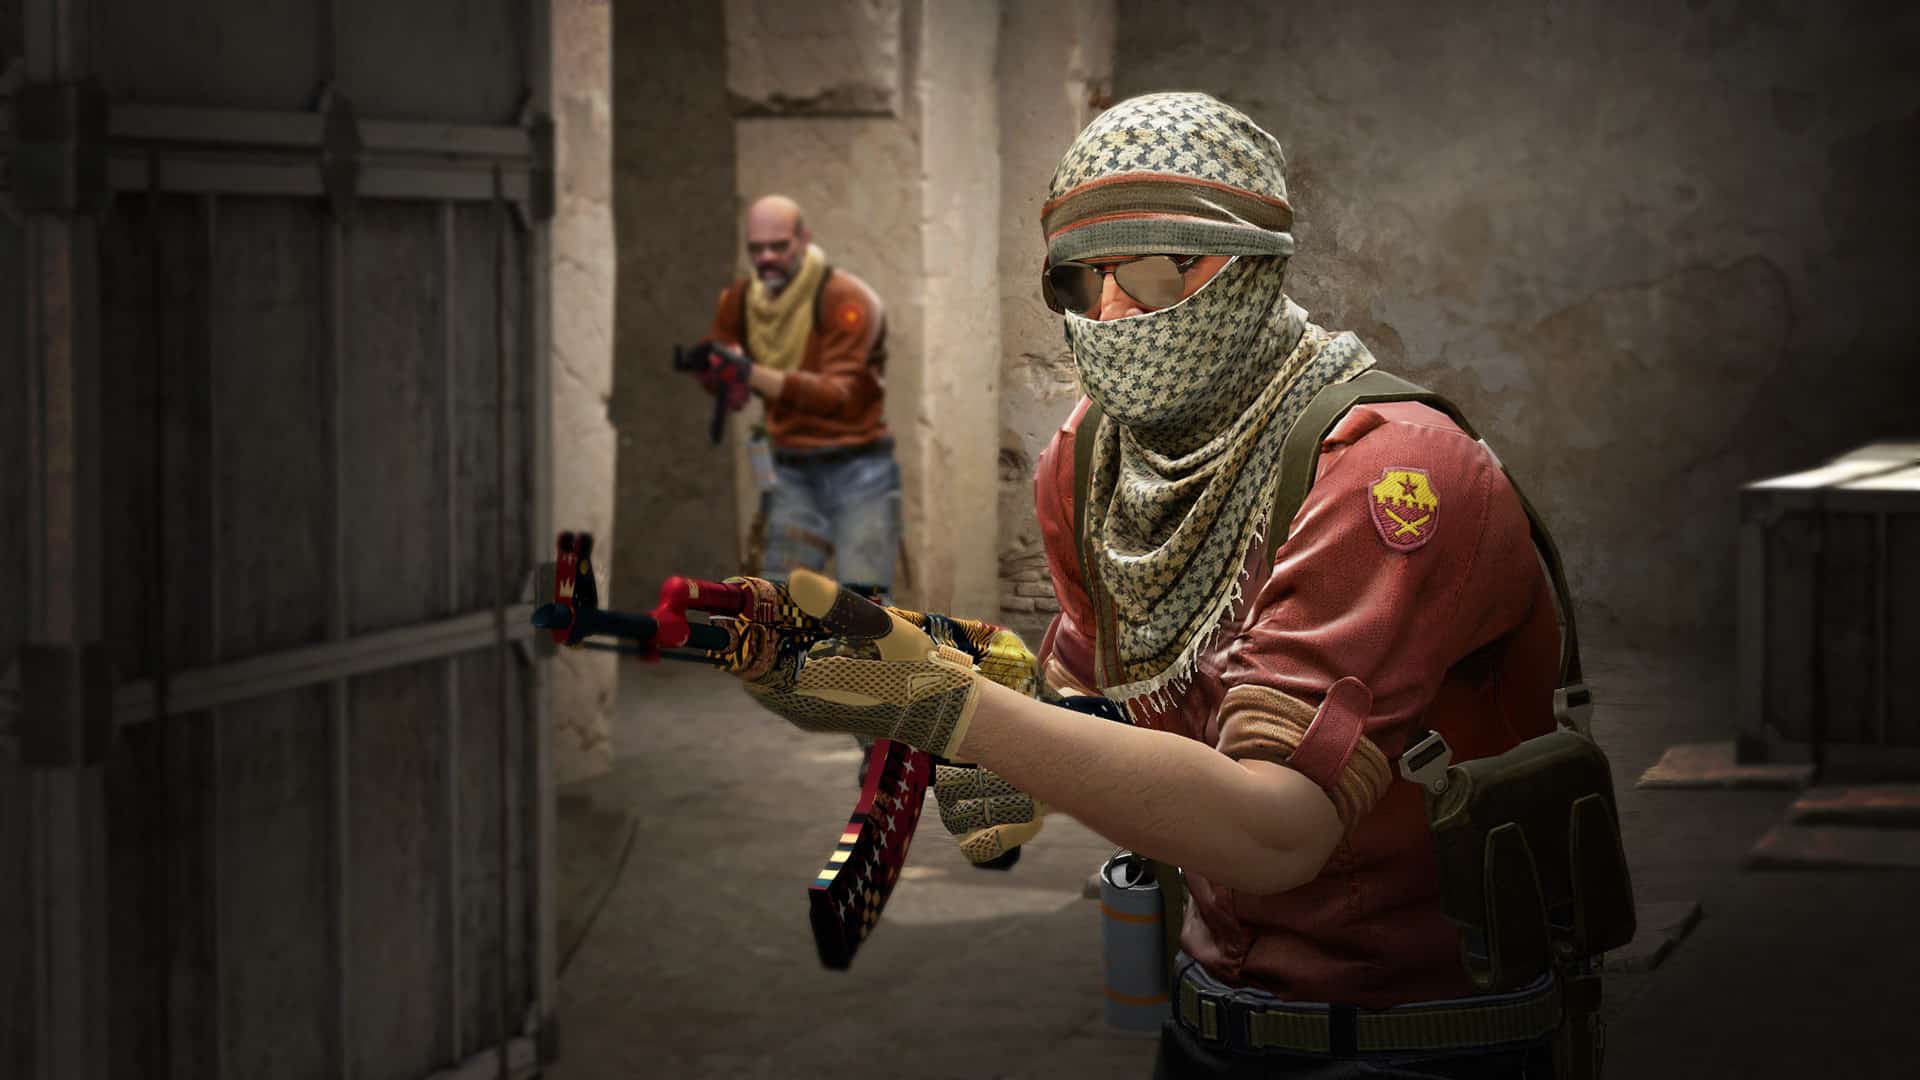 Counter-Strike attacker side character holding AK47 rifle